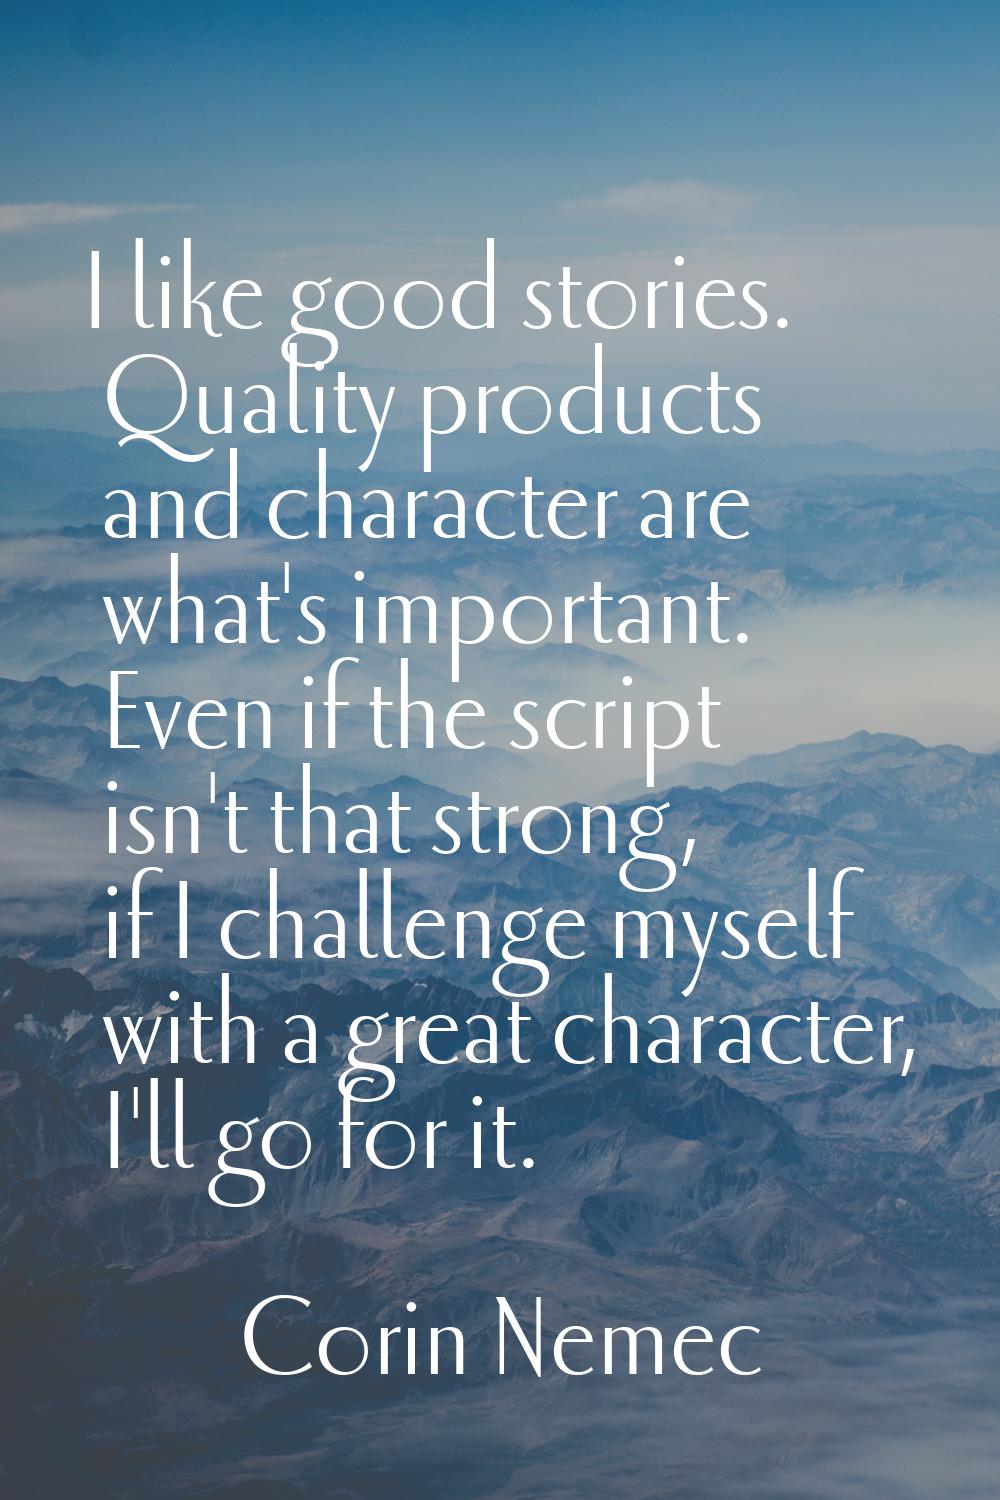 I like good stories. Quality products and character are what's important. Even if the script isn't 